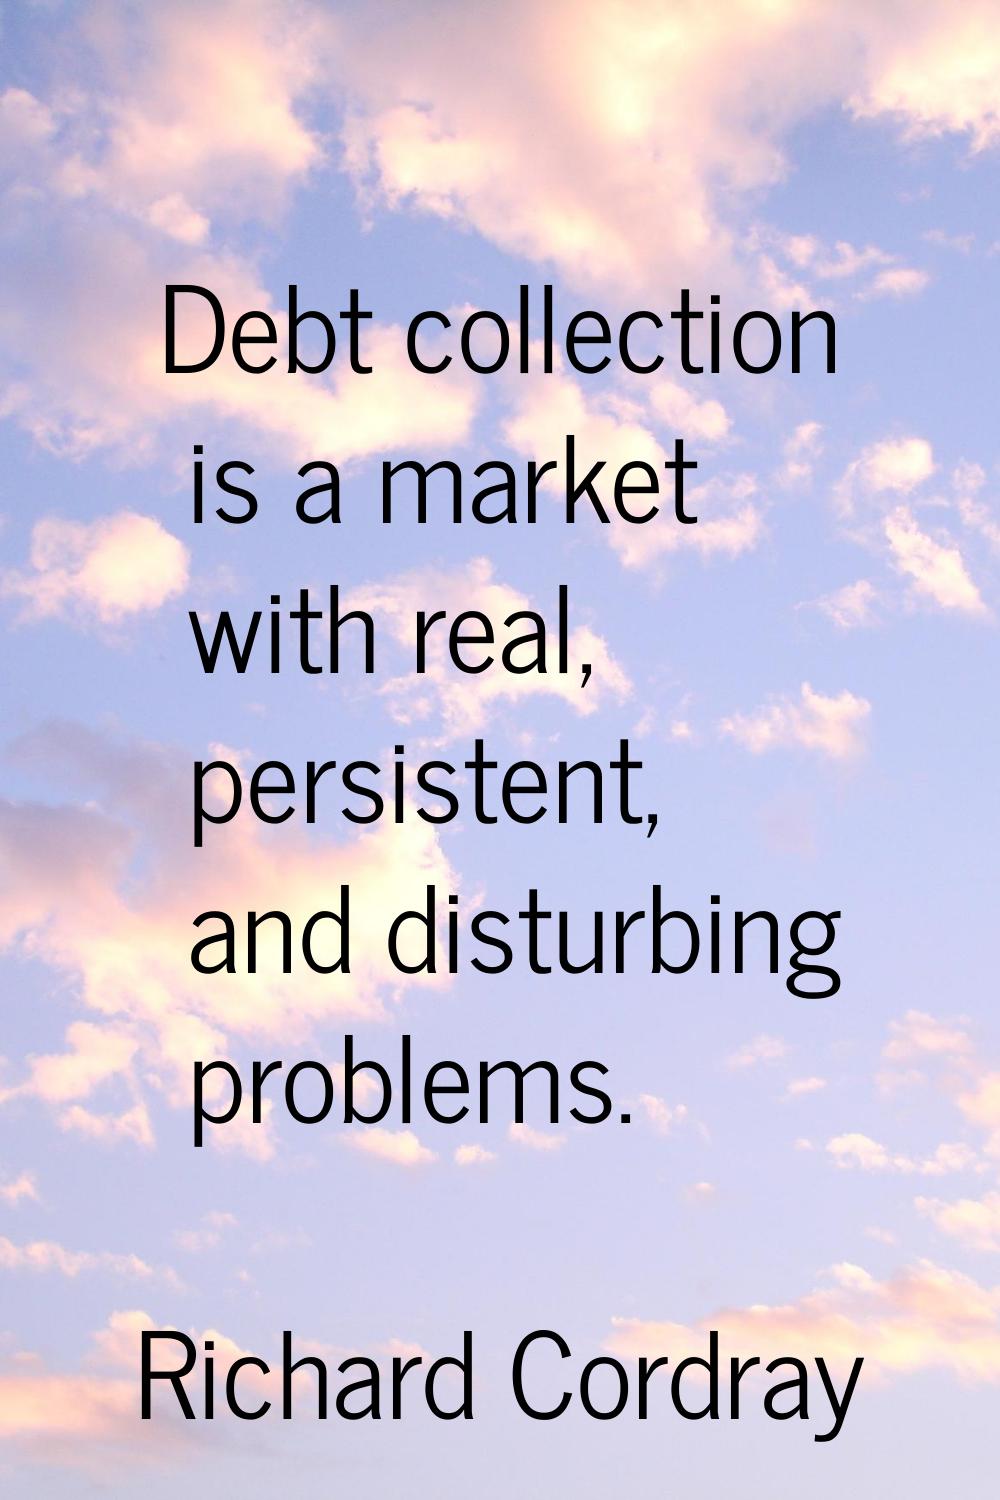 Debt collection is a market with real, persistent, and disturbing problems.